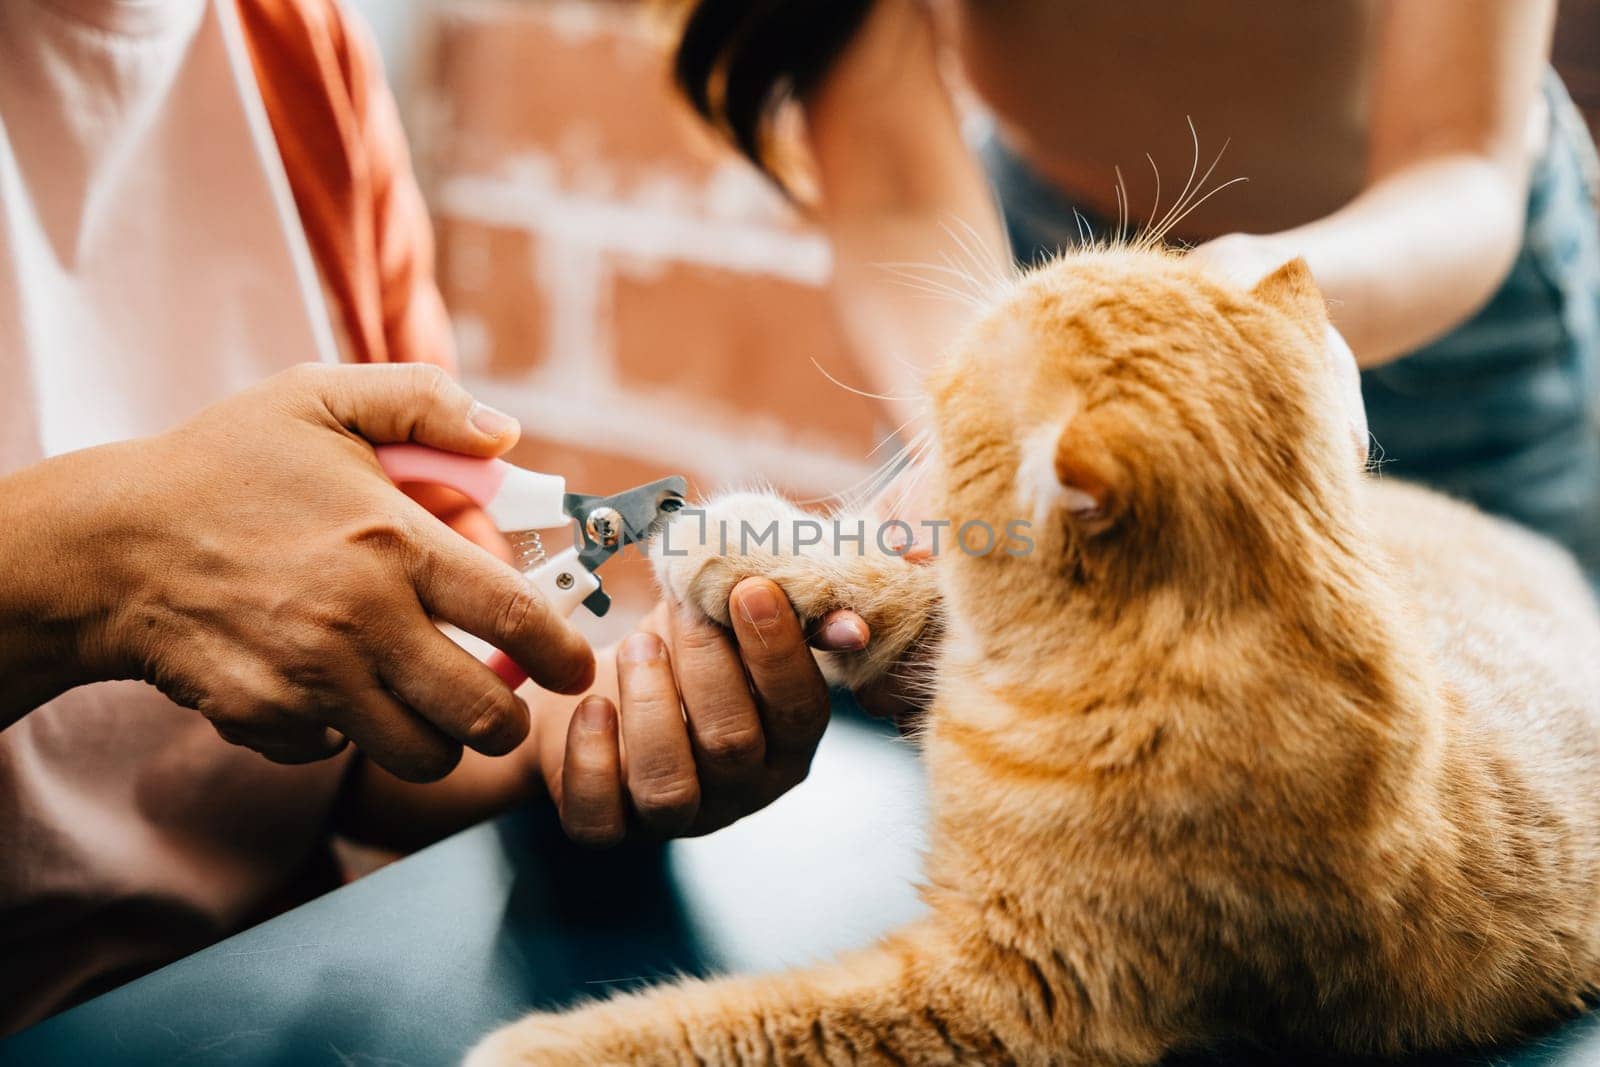 Close-up of cat nail trimming as veterinarian tends to Scottish Fold cat claws, meticulous pet care. A girl expertly cuts orange cat's nails, emphasizing importance of proper nail care for animals. by Sorapop